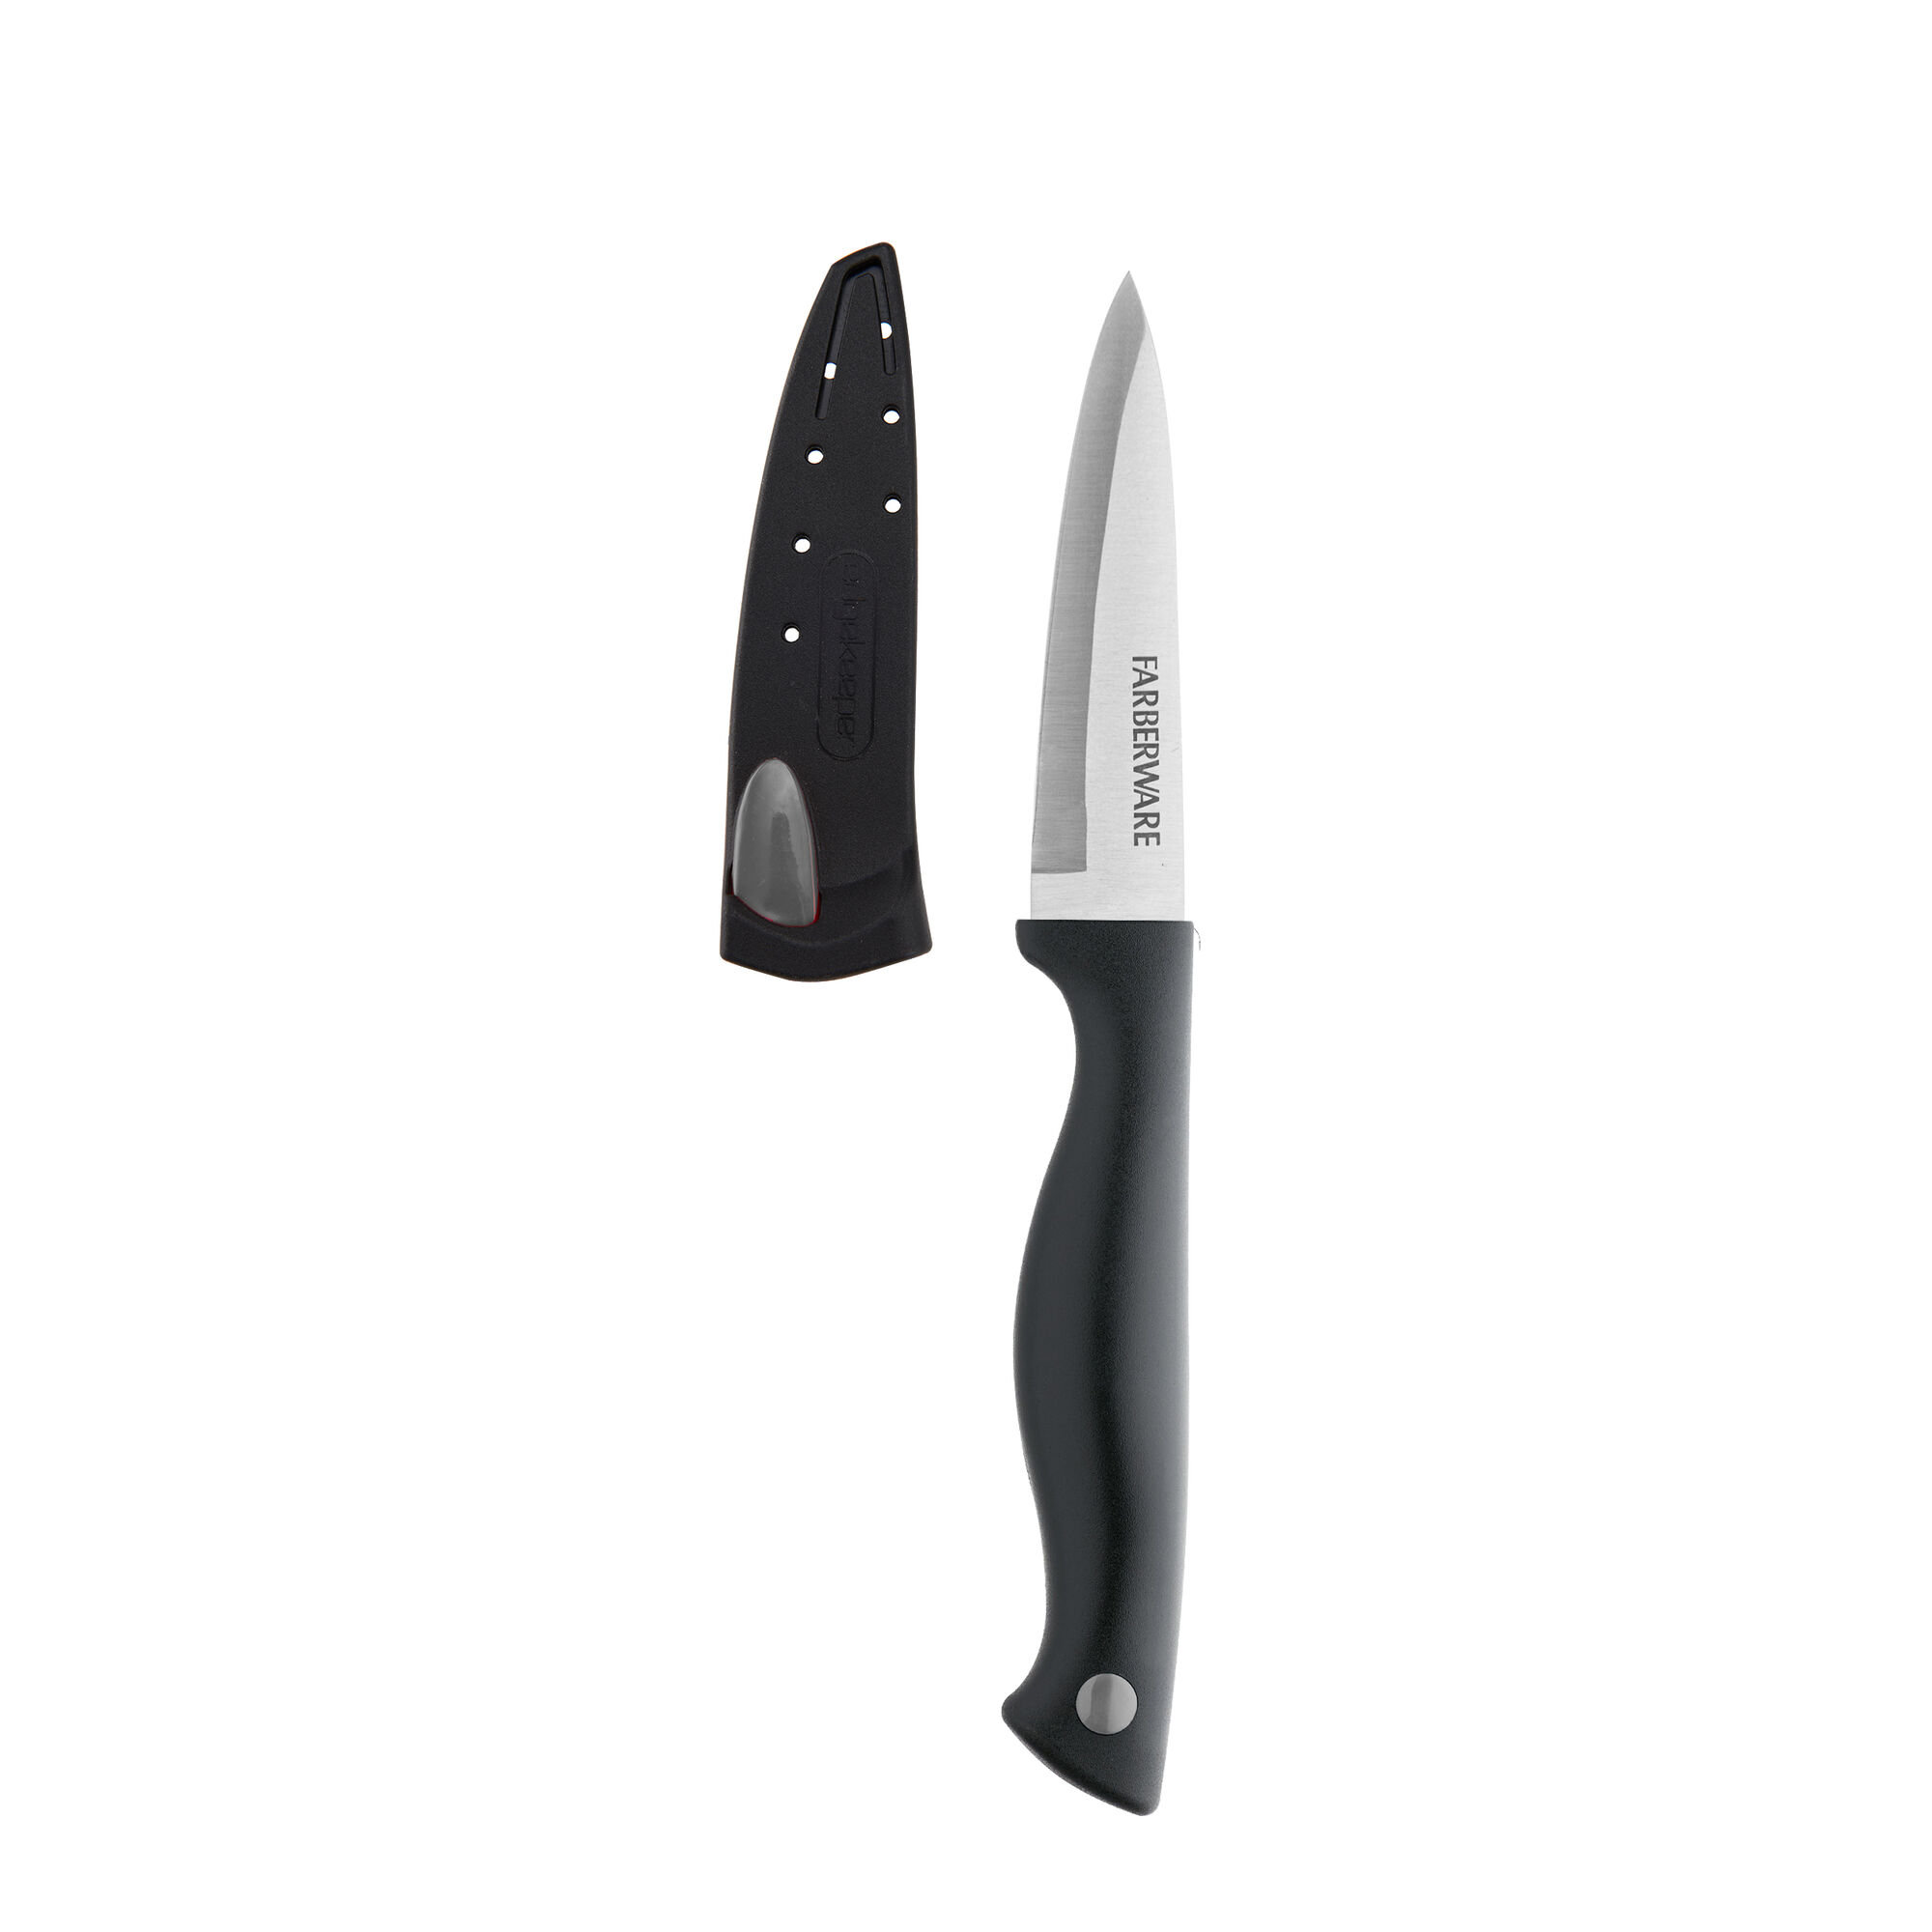 Farberware Edgekeeper 3.5-Inch Paring Knife With Self-Sharpening Blade  Cover, High Carbon-Stainless Steel Kitchen Knife With Ergonomic Handle,  Razor-Sharp Knife, Black